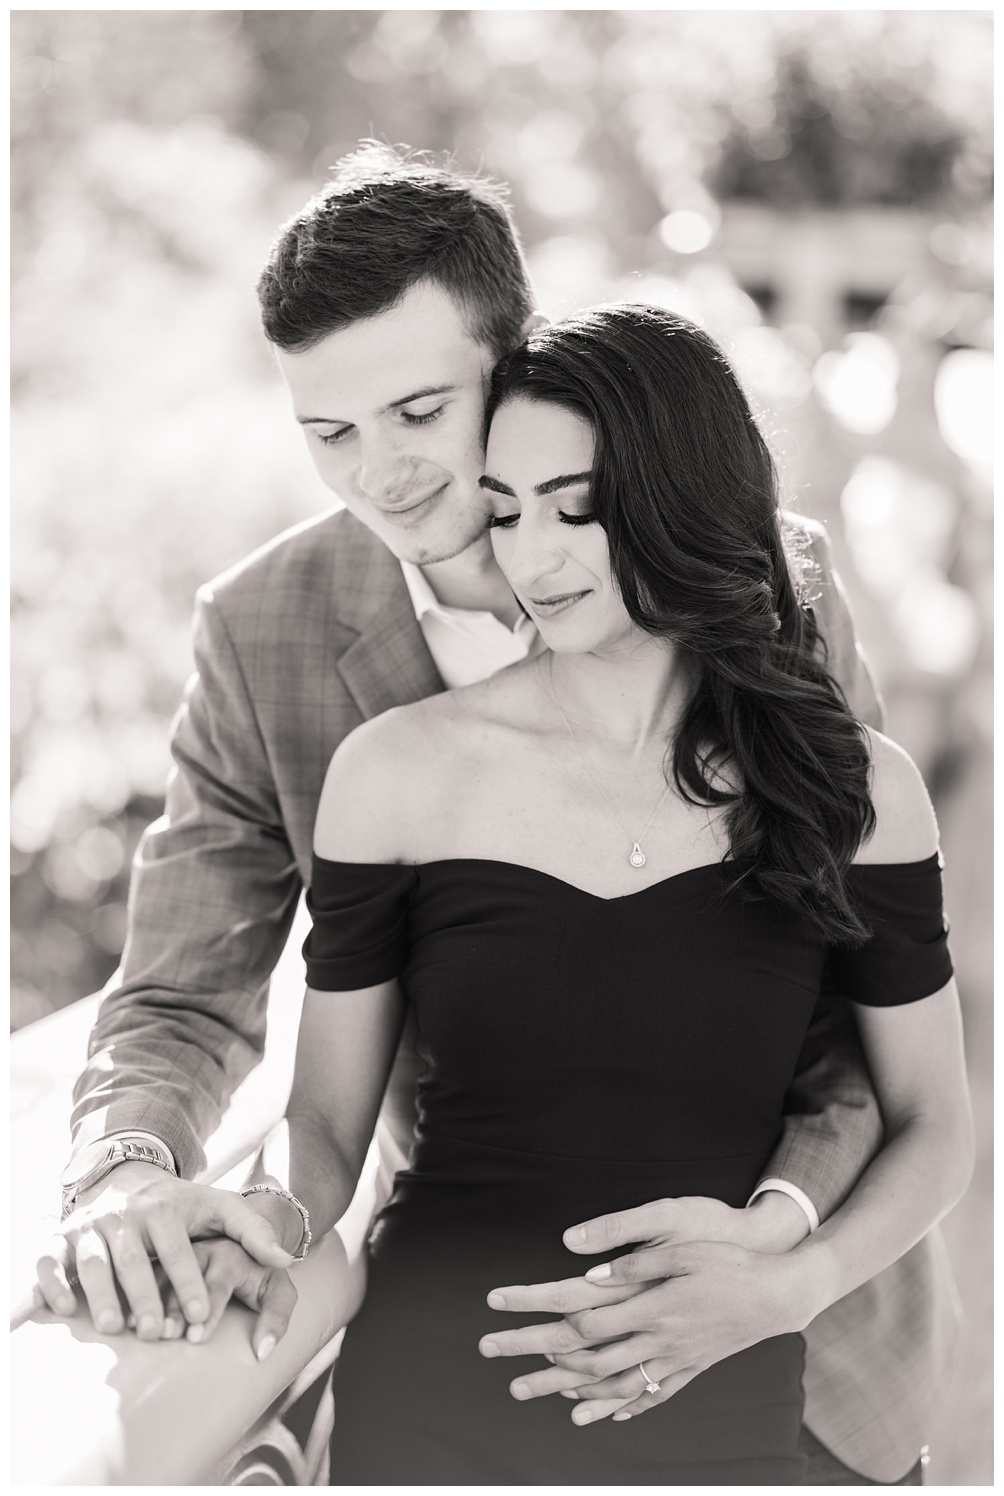 Iconic black and white engagement photos in Central Park